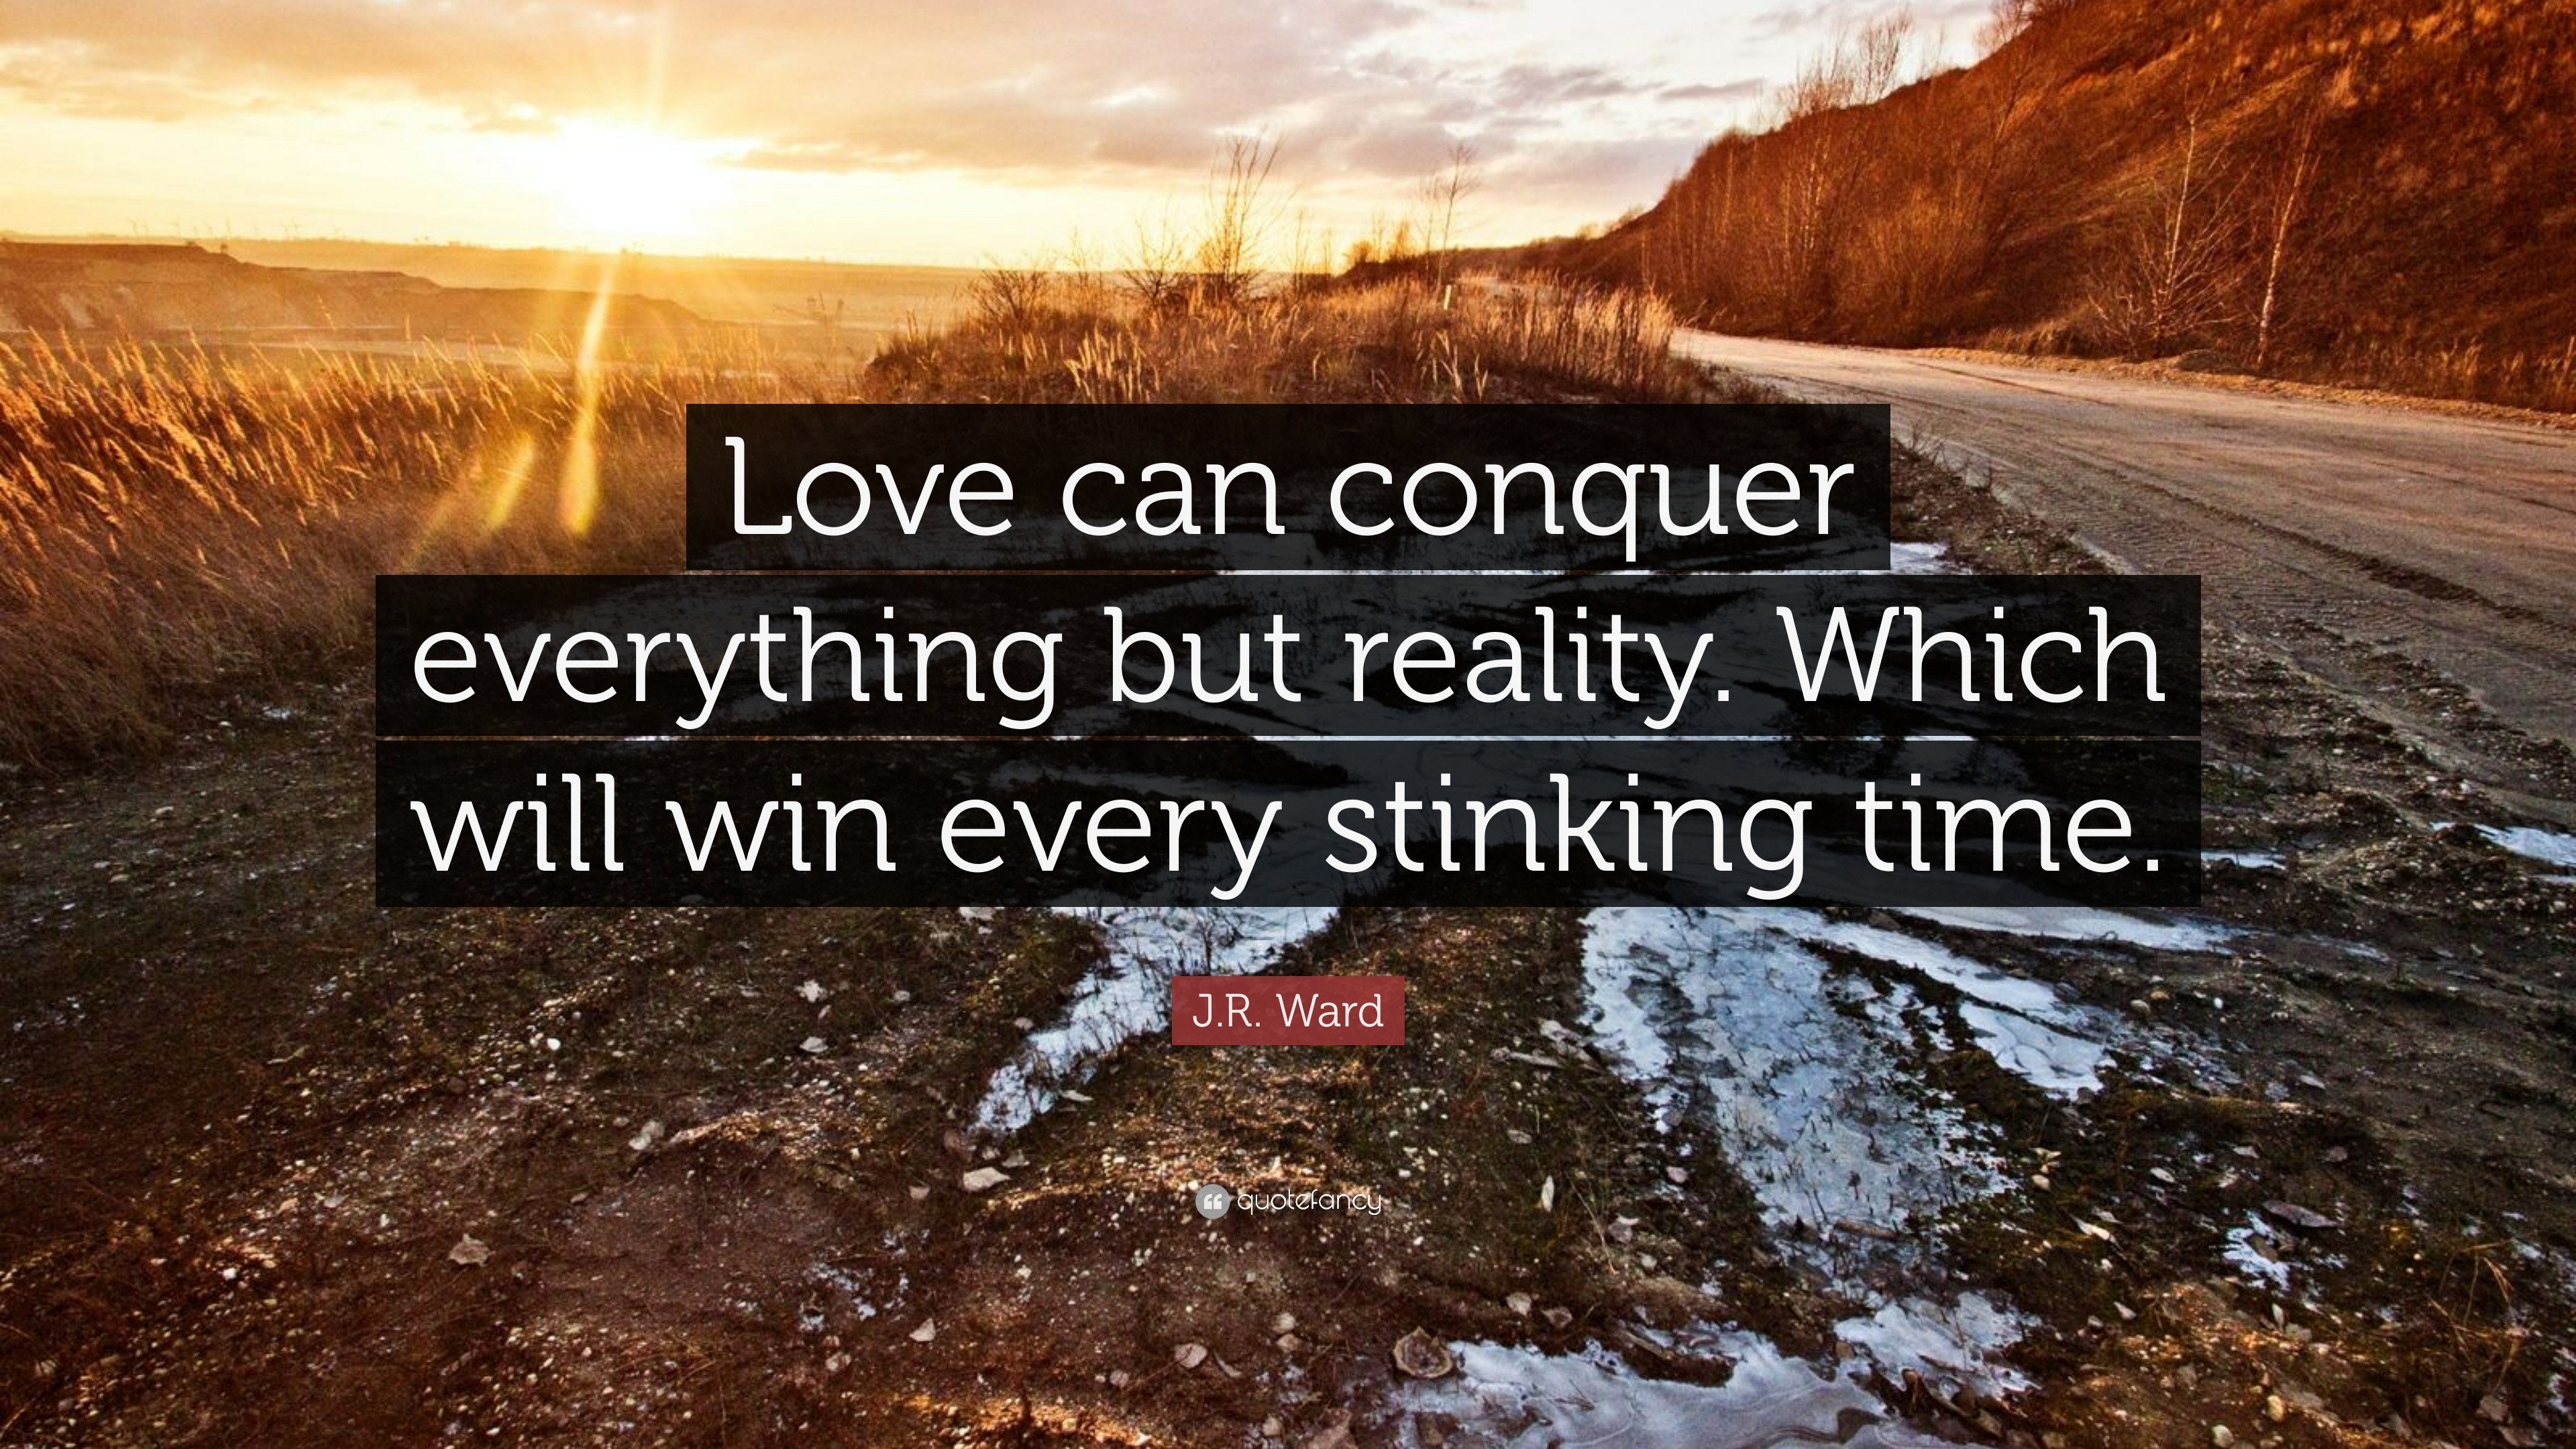 J R Ward Quote “Love can conquer everything but reality Which will win every